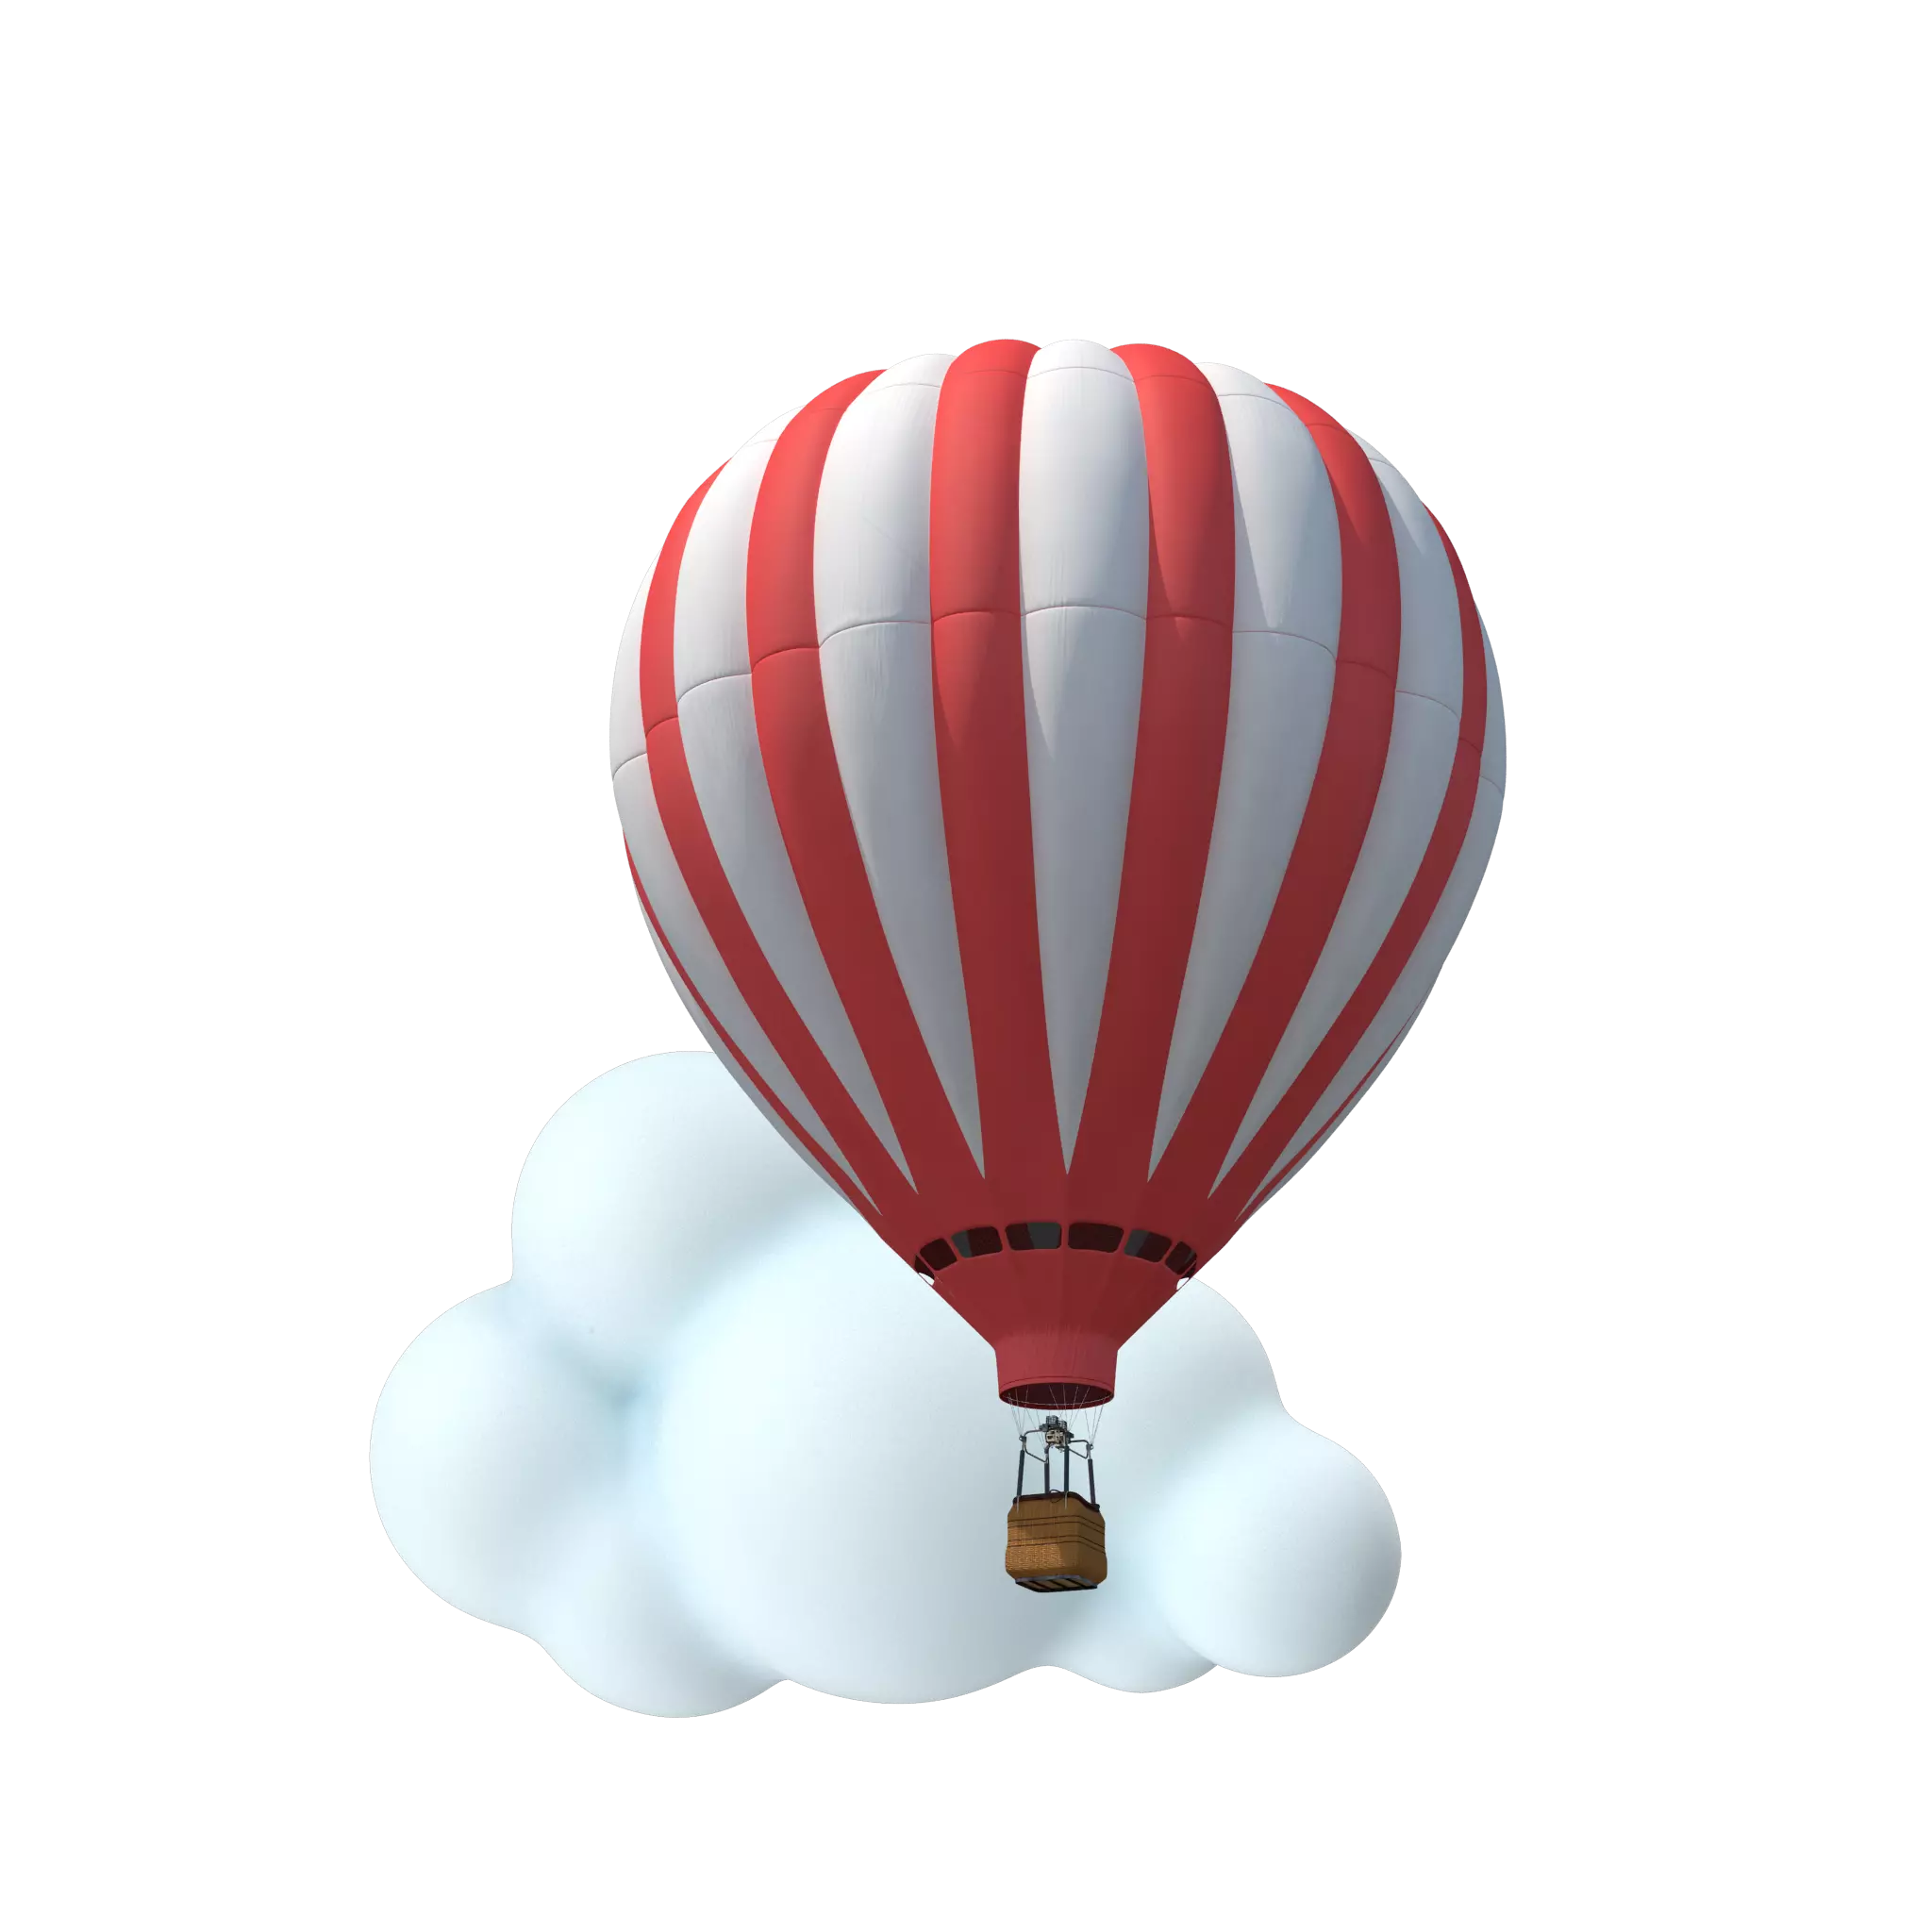 A hot air balloon as the Employee Journey Featured Insights image